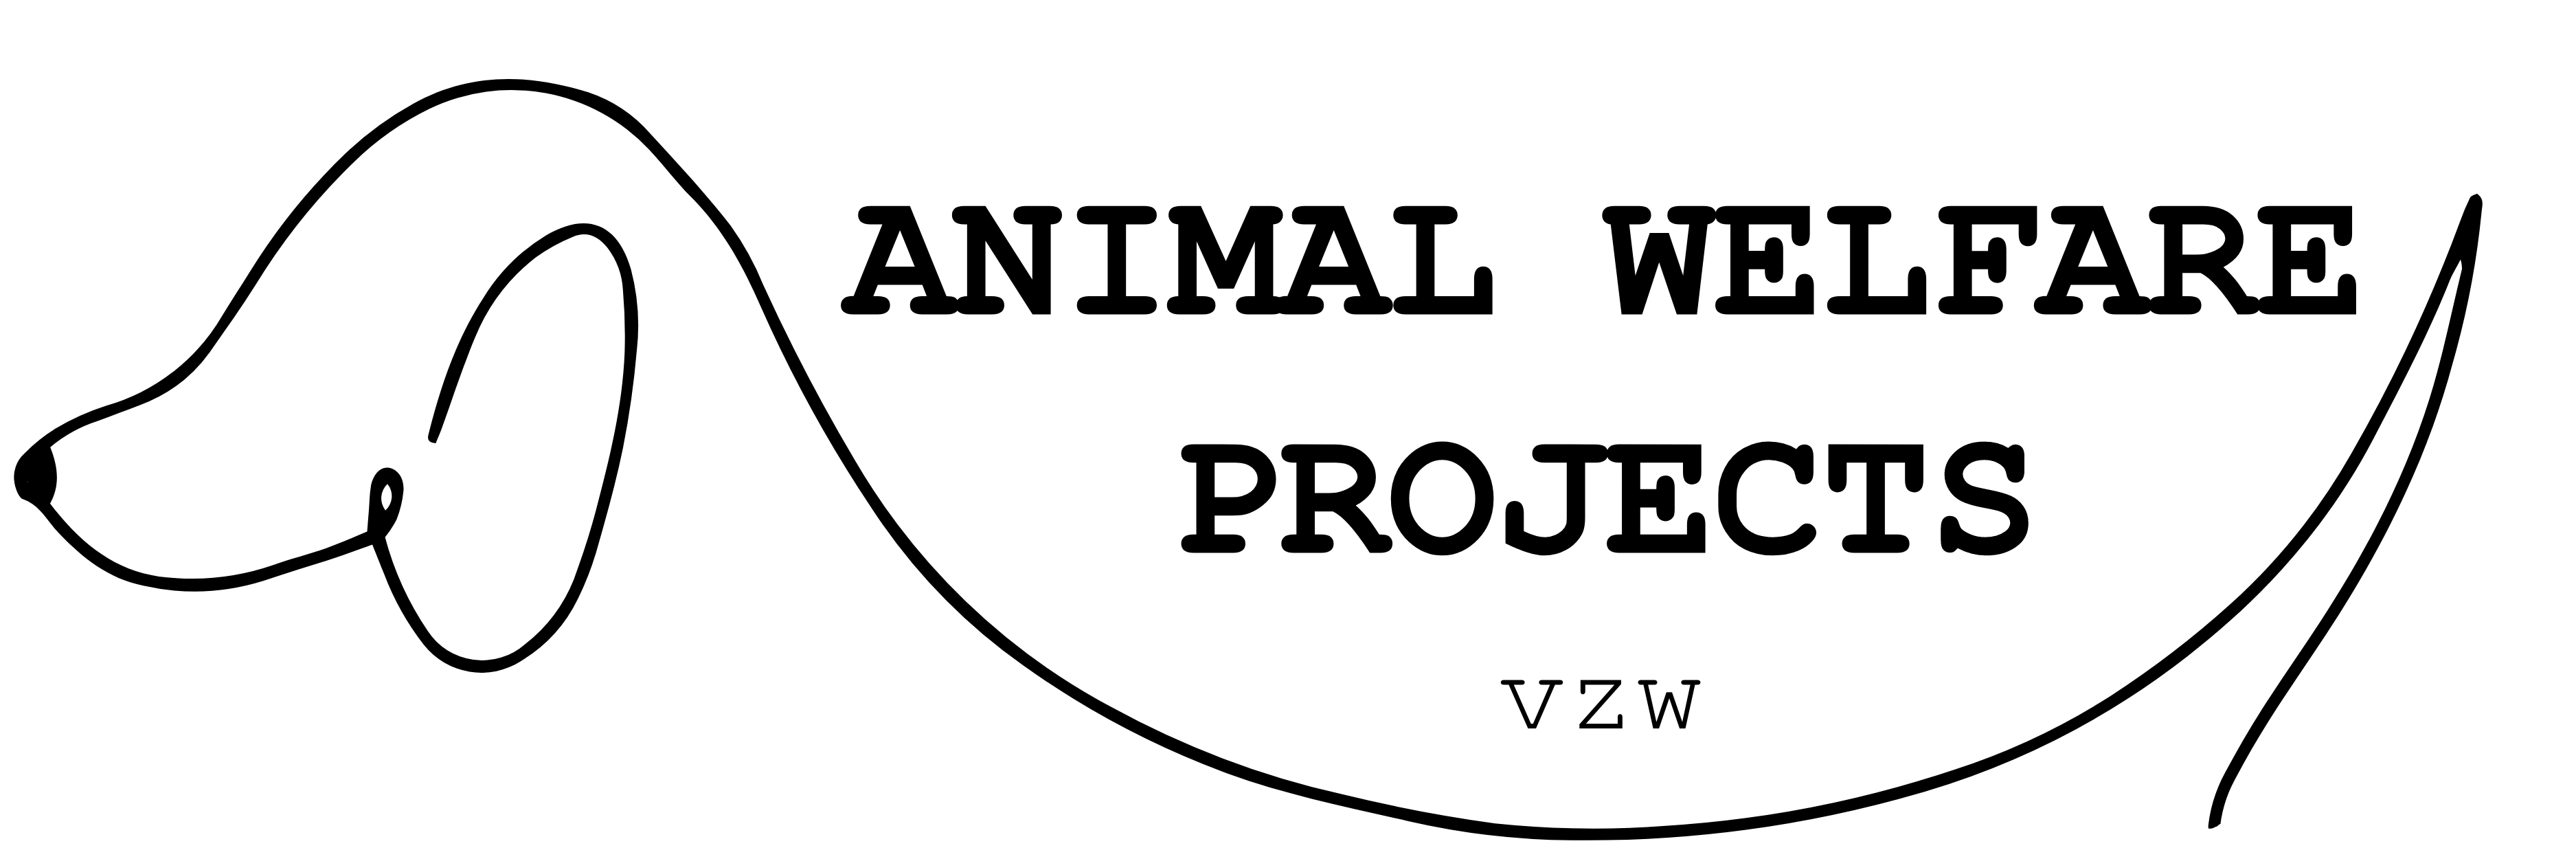 AWP Animal Welfare Projects vzw